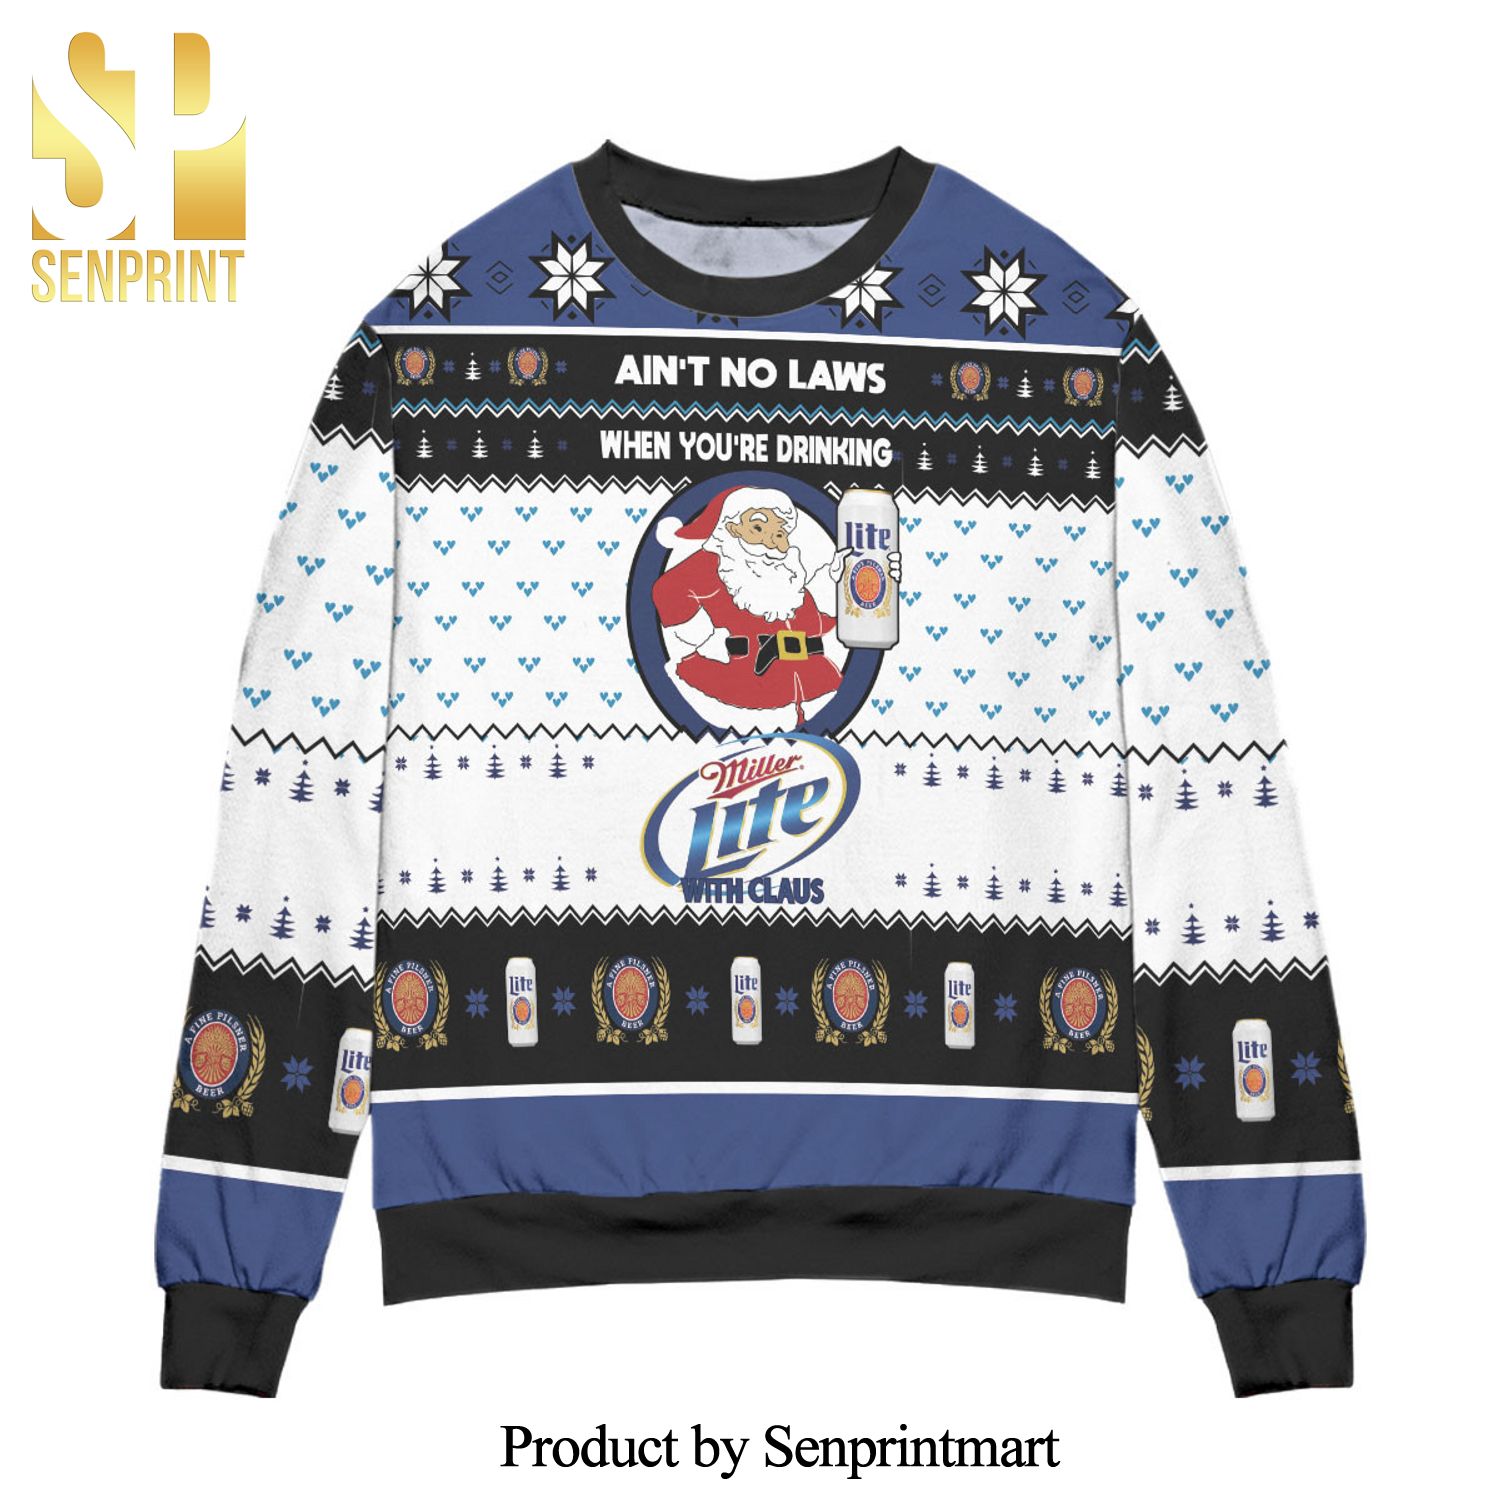 Ain’t No Laws When You’re Drinking Miller Lite With Claus Wool Knitted Ugly Christmas Sweater – White Blue